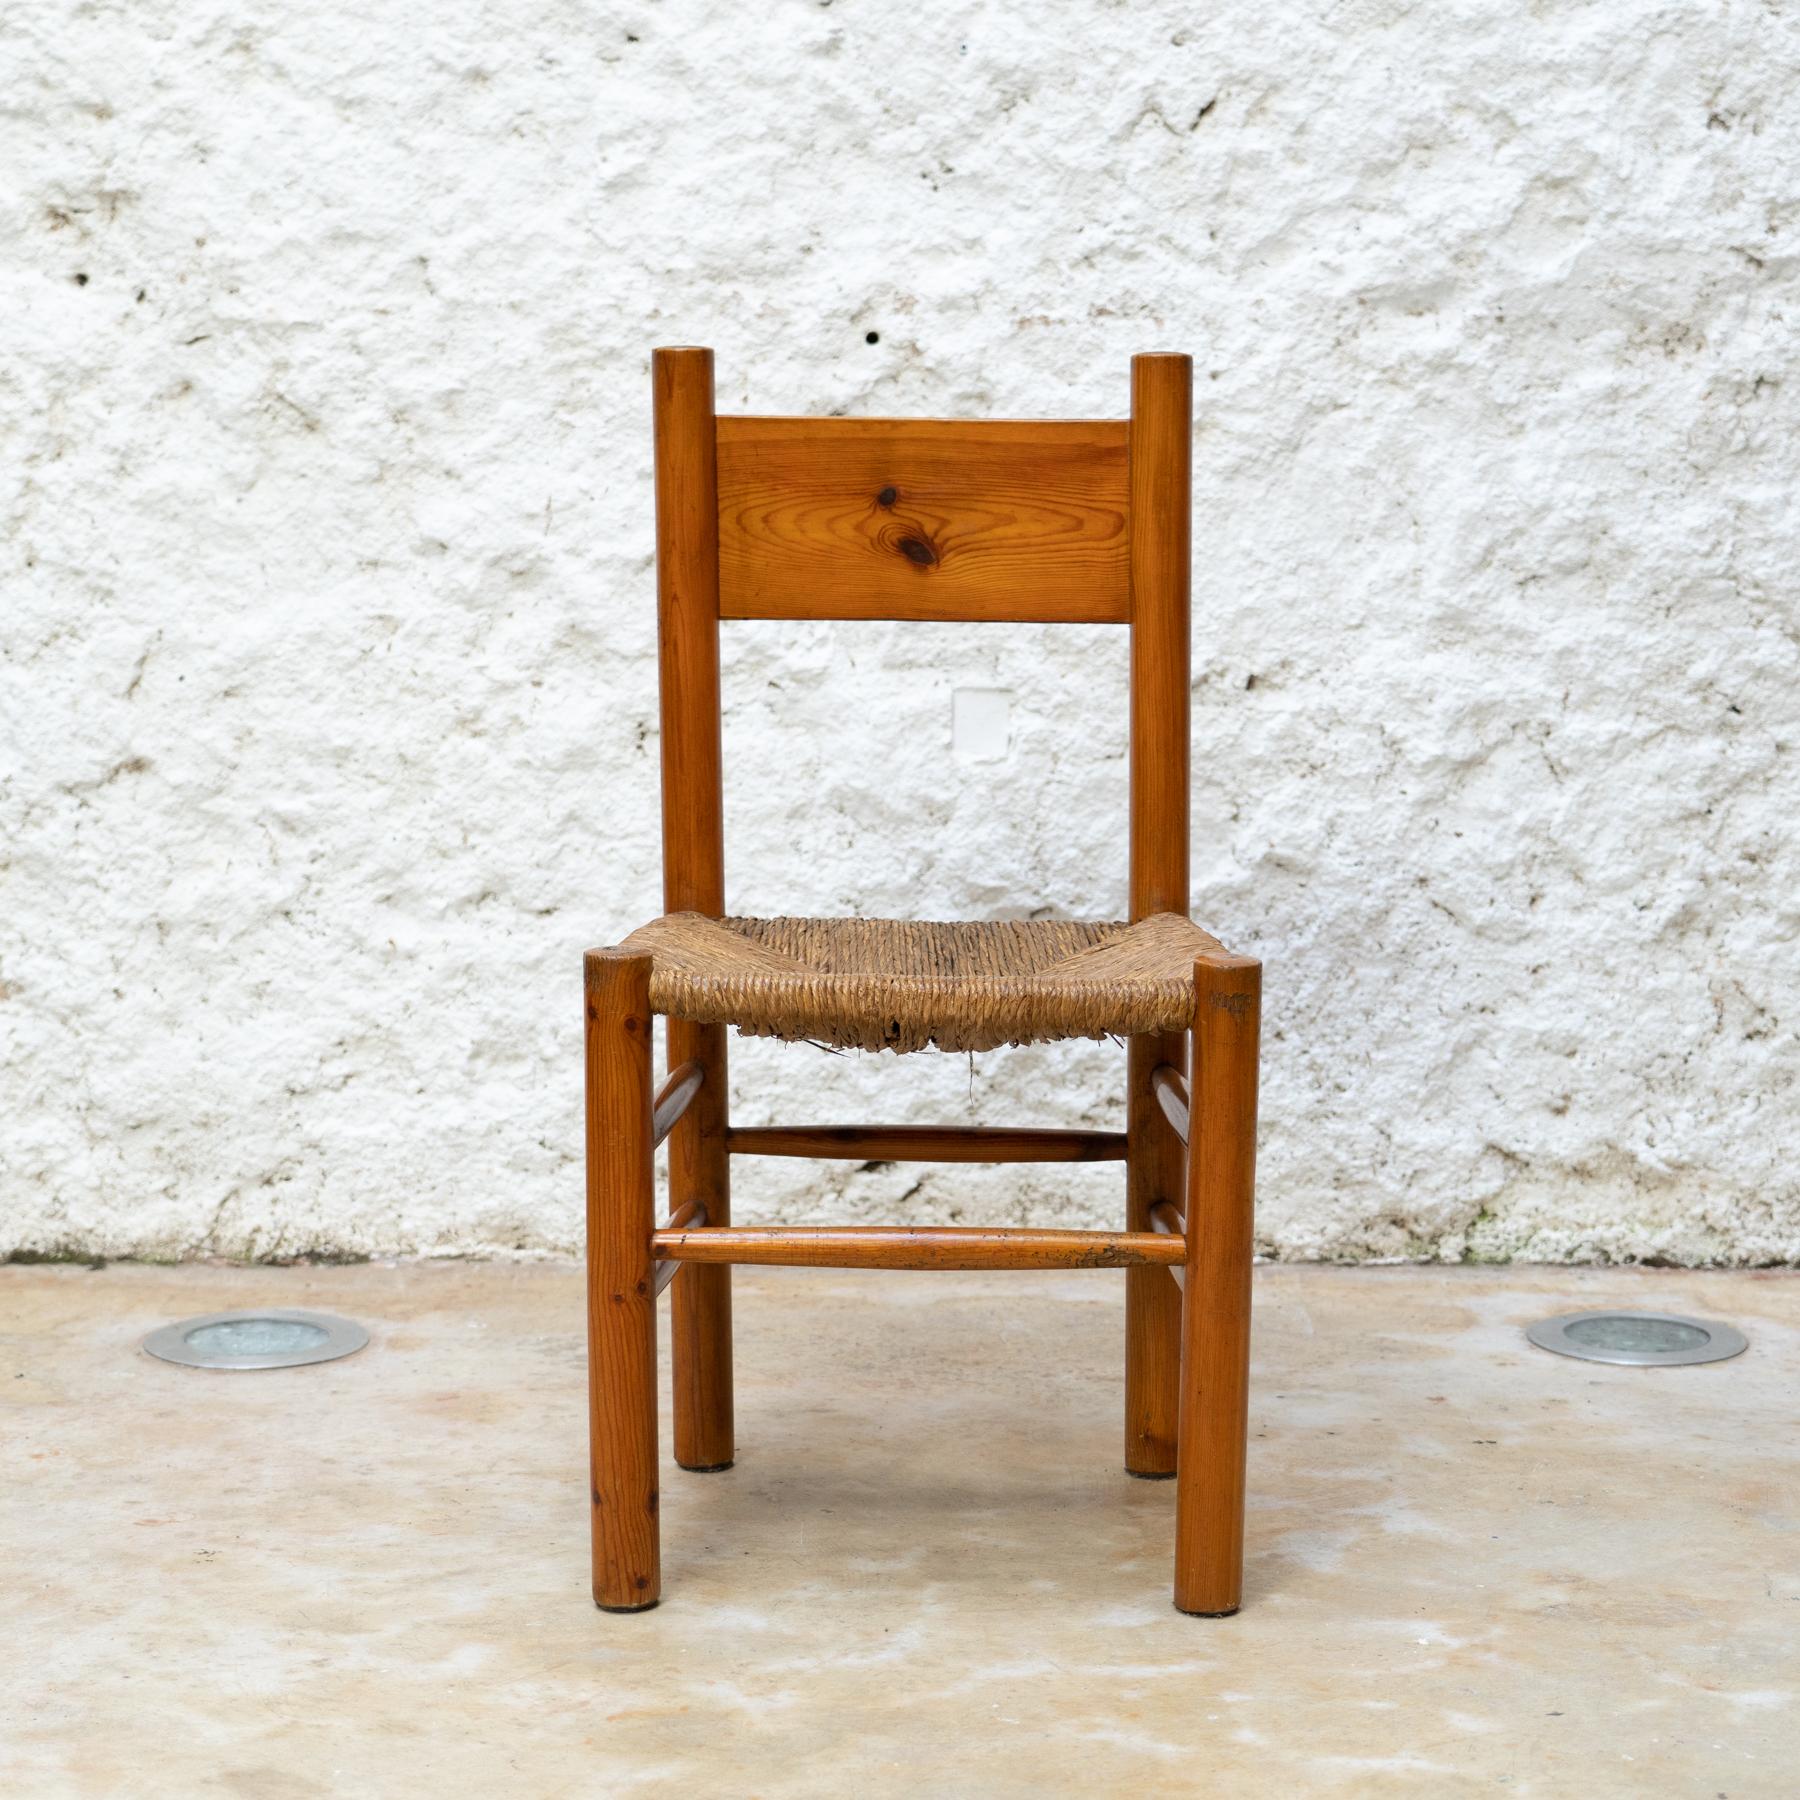 Wood and Rattan Mid Century Modern Chair After Charlotte Perriand, circa 1960 For Sale 2